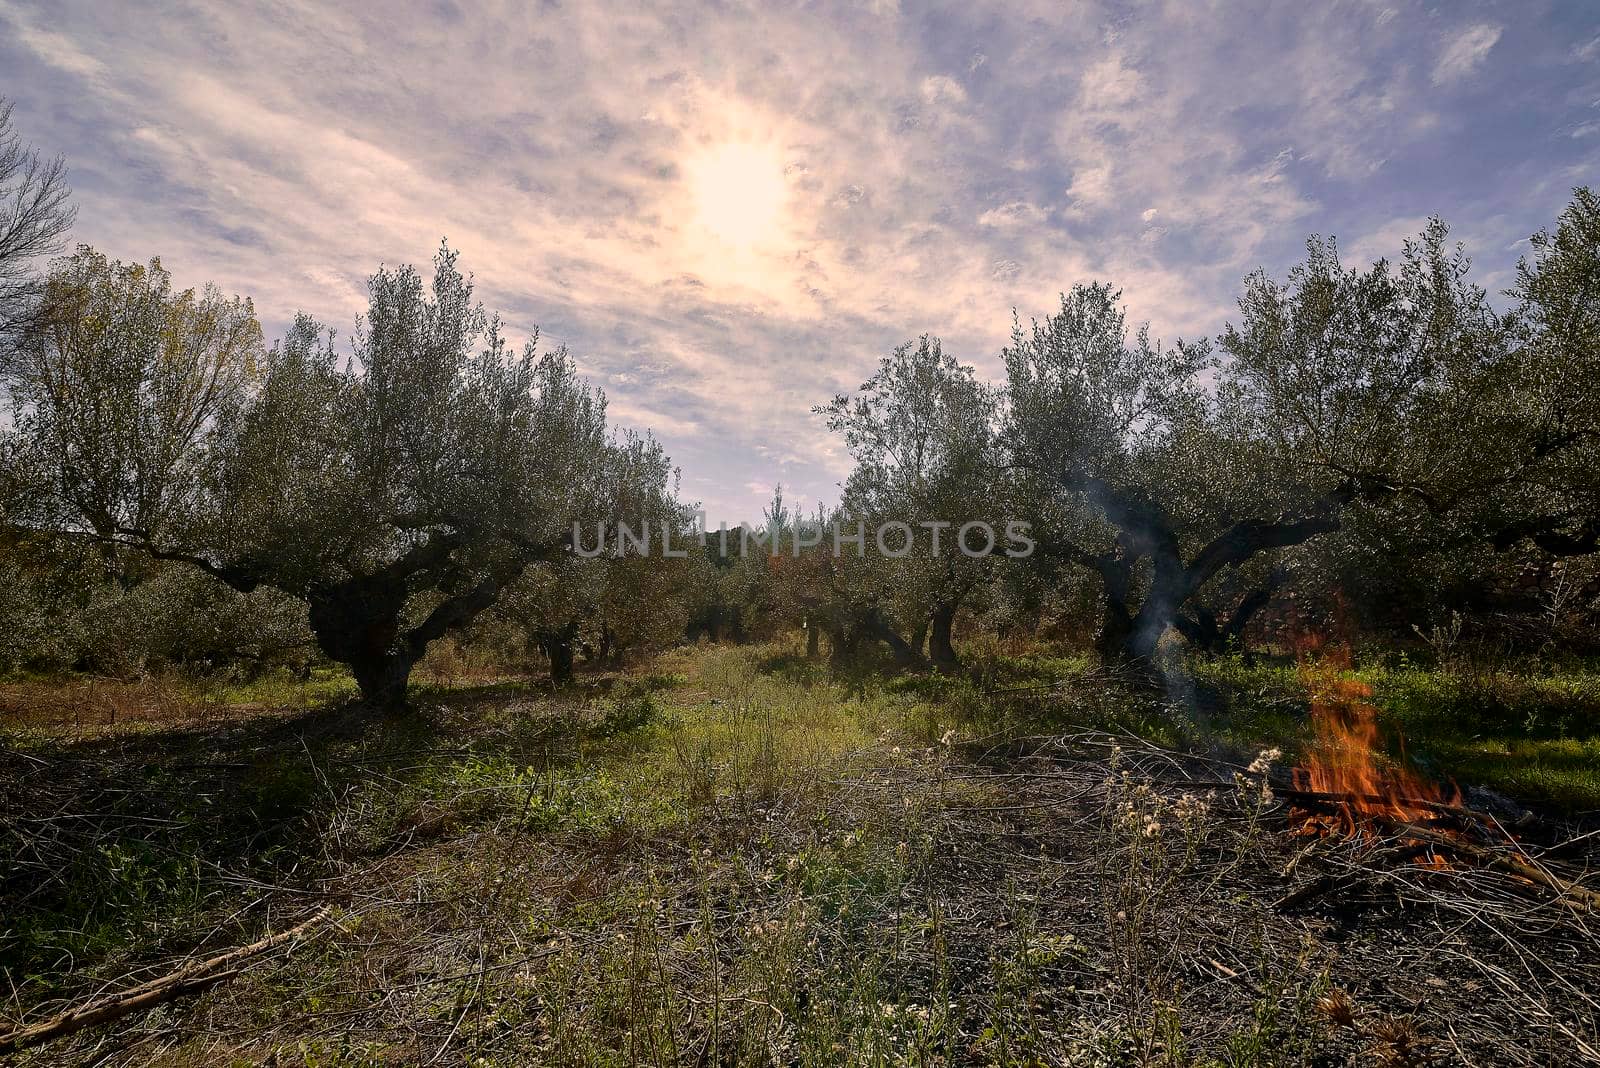 Field of centenary olive trees ready for harvesting. Traditional Mediterranean agriculture. Blue sky